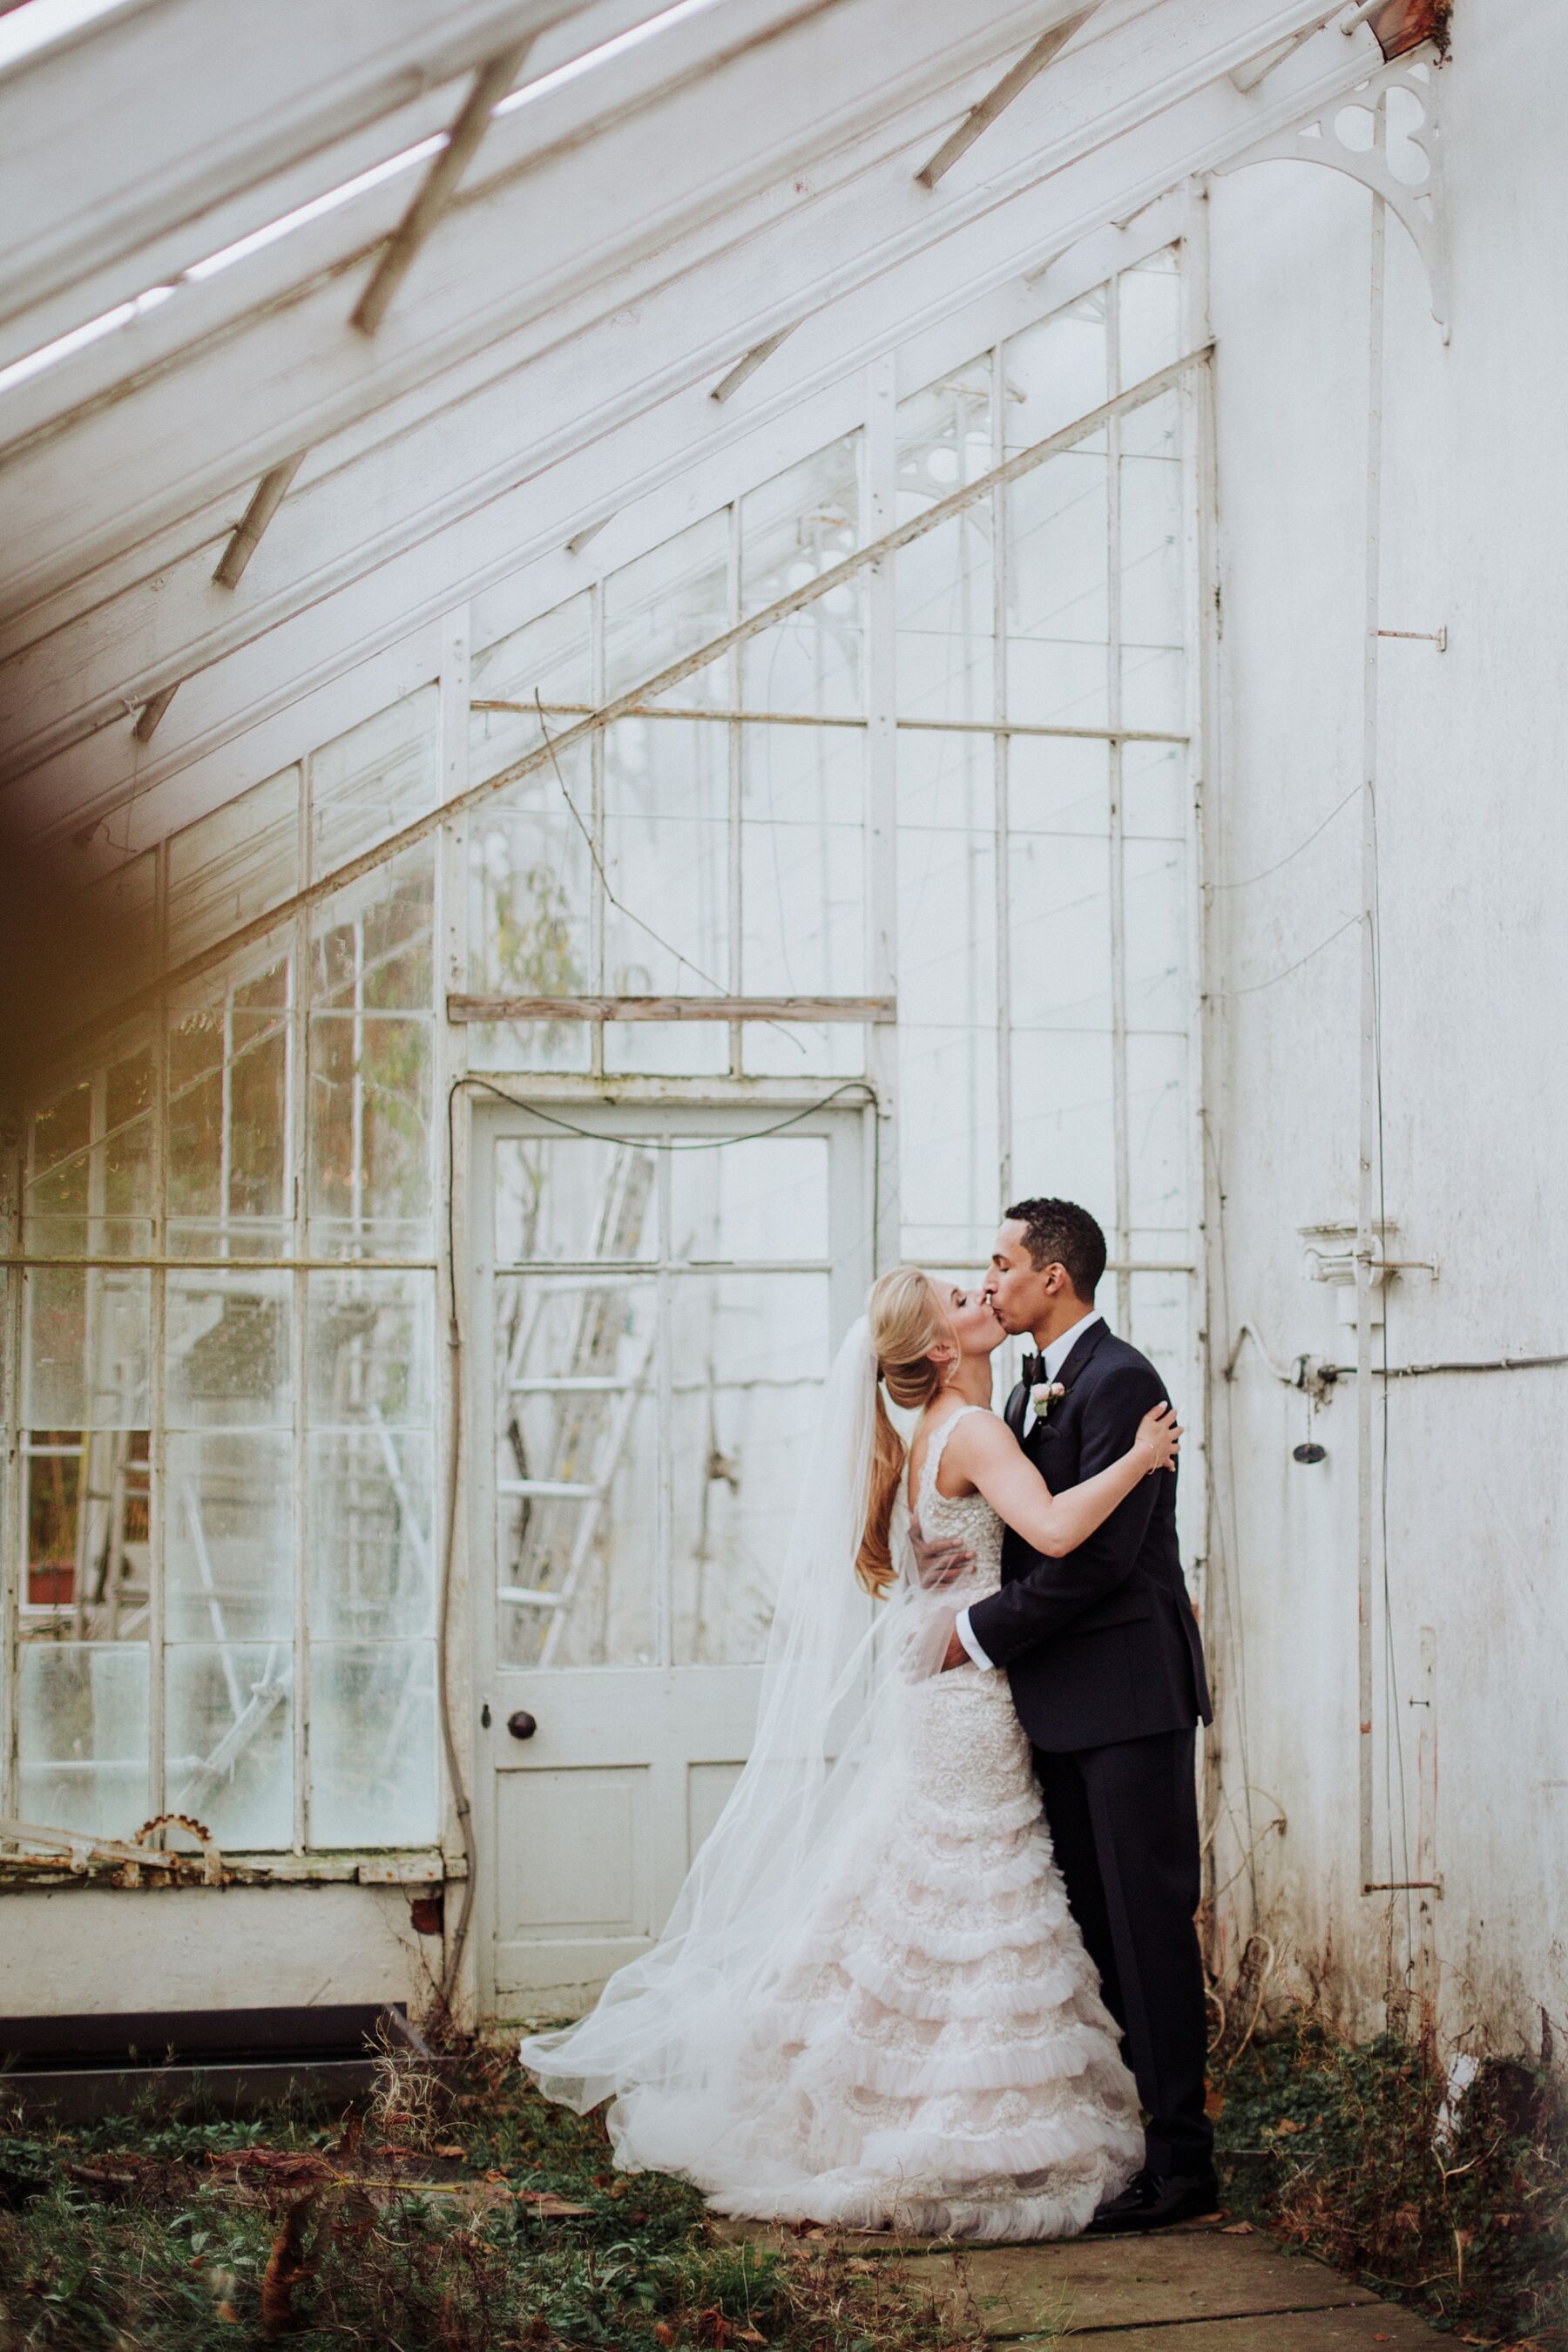 Bride standing by a glasshouse wearing a tiered wedding dress, by Claudia Rose Carter Photography.